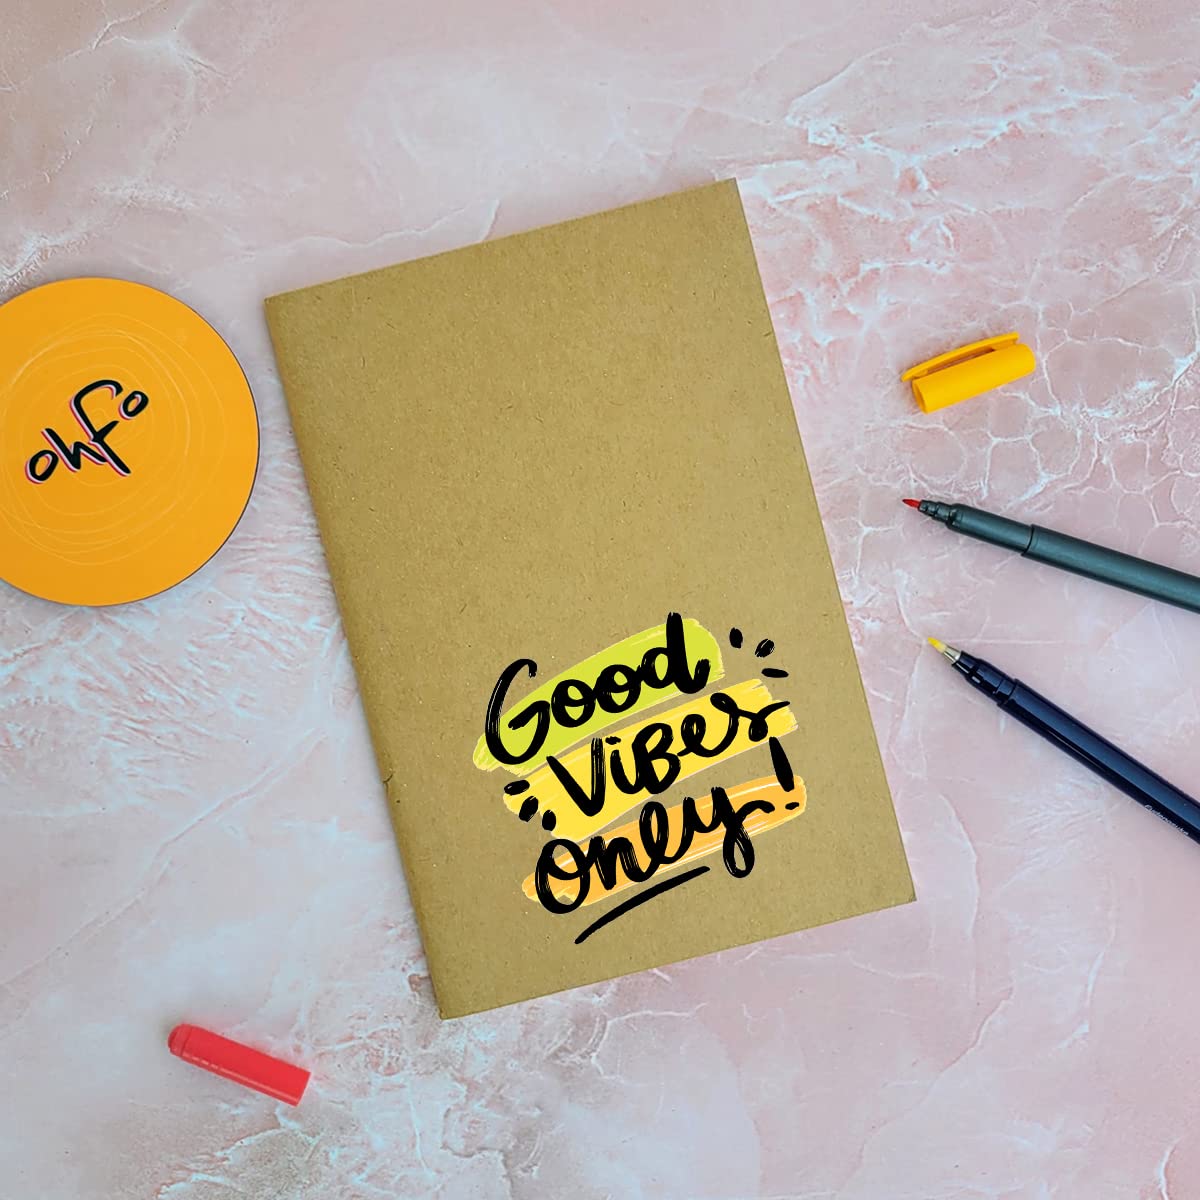 Good Vibes Only - Brown A5 Doodle Notebook - Kraft Cover Notebook - A5 - 300 GSM Kraft Cover - Handmade - Unruled - 80 Pages - Natural Shade Pages 120 GSM - Funny Quotes & Quirky, Funky designs